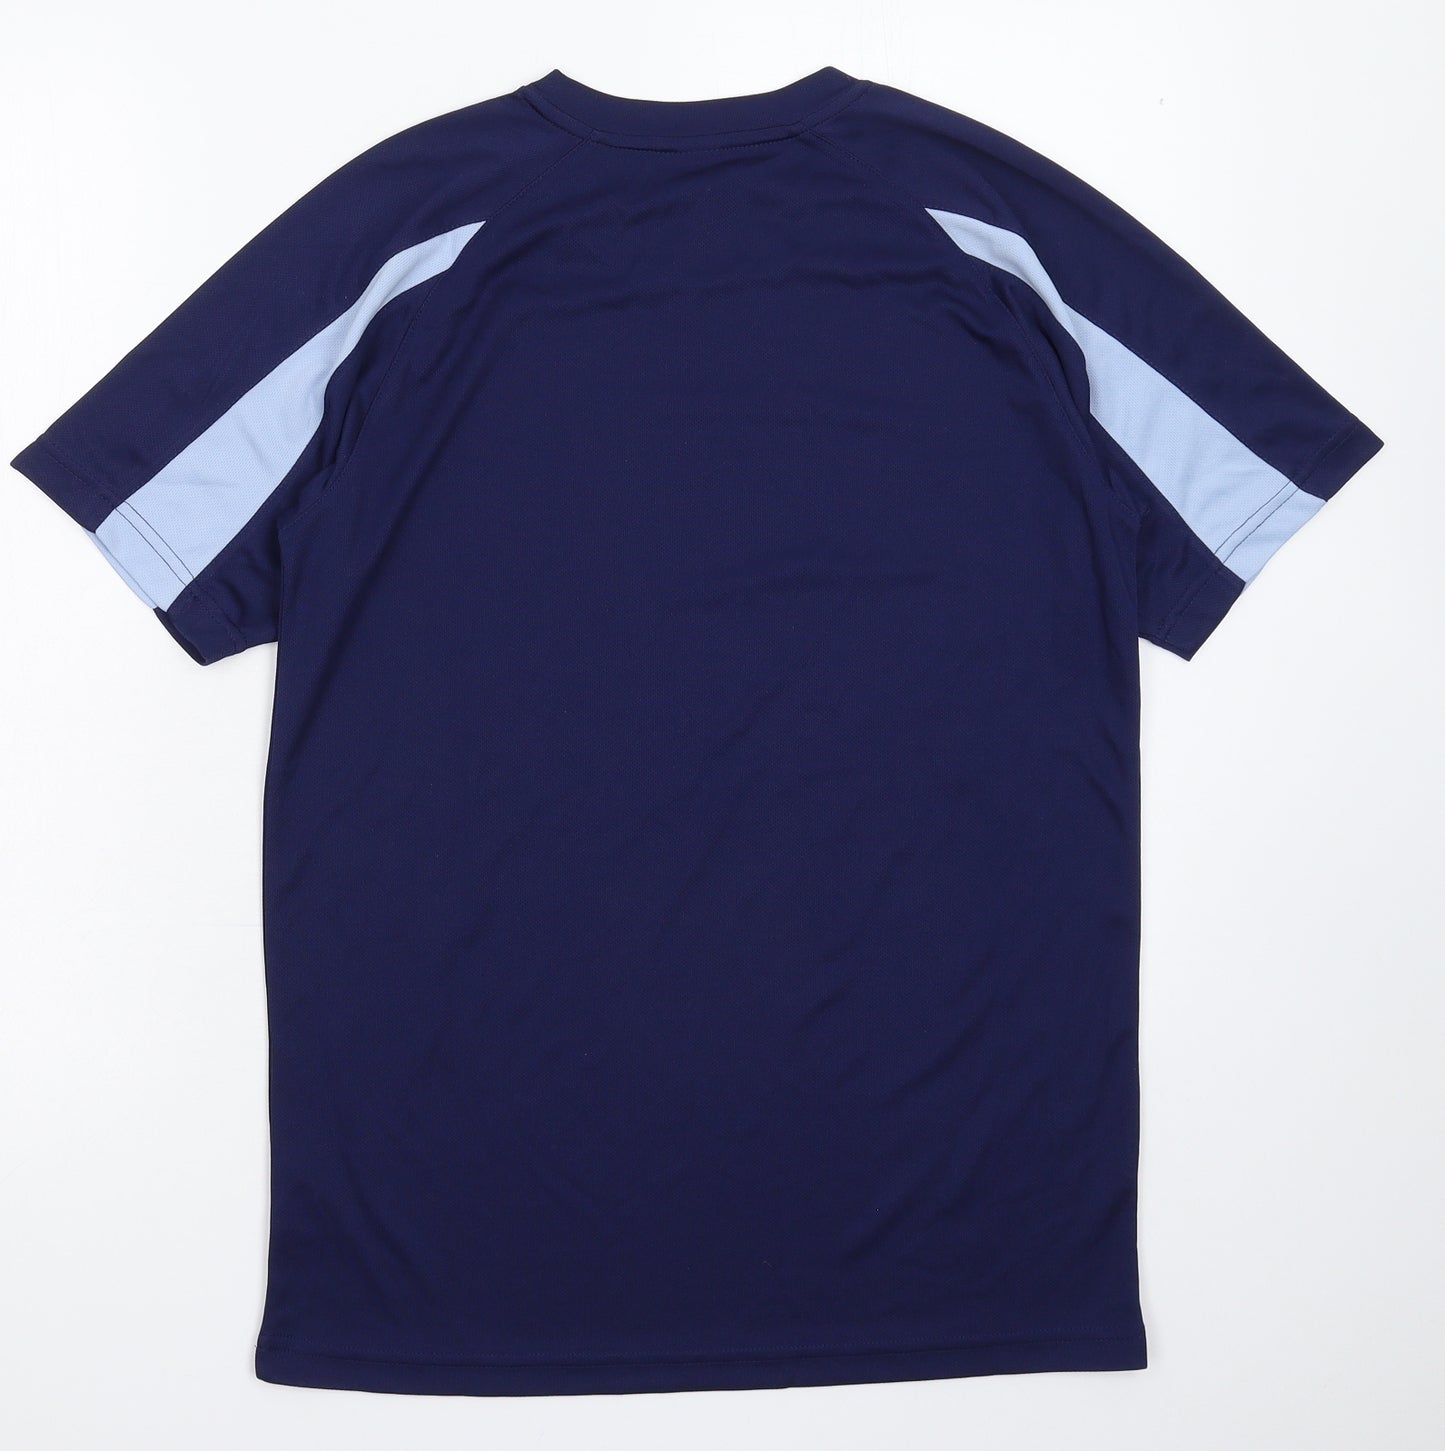 All We Do is Mens Blue   Jersey T-Shirt Size S